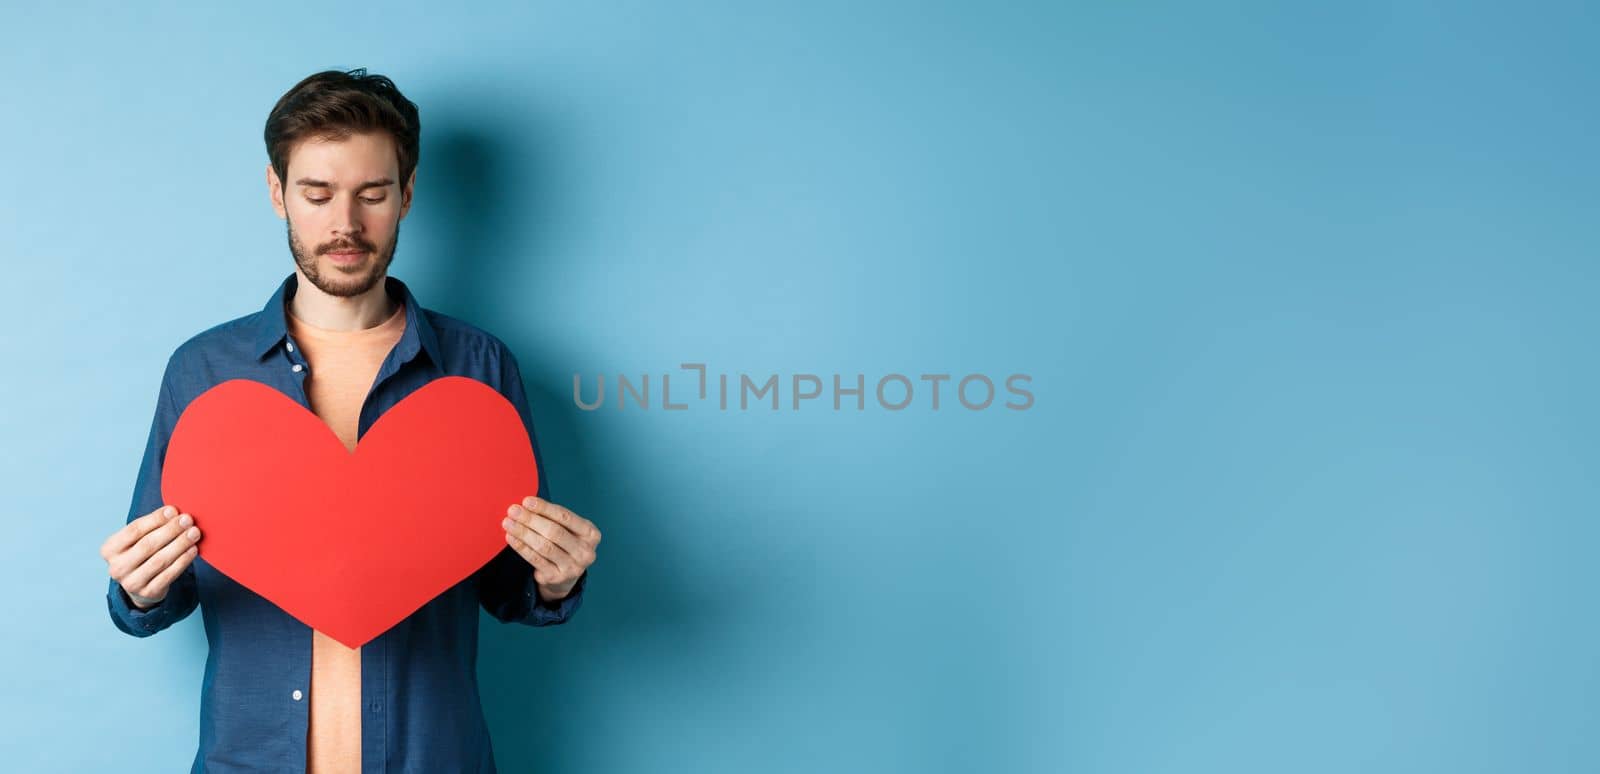 Lonely guy looking sad at valentines red heart with sad face, standing over blue background.